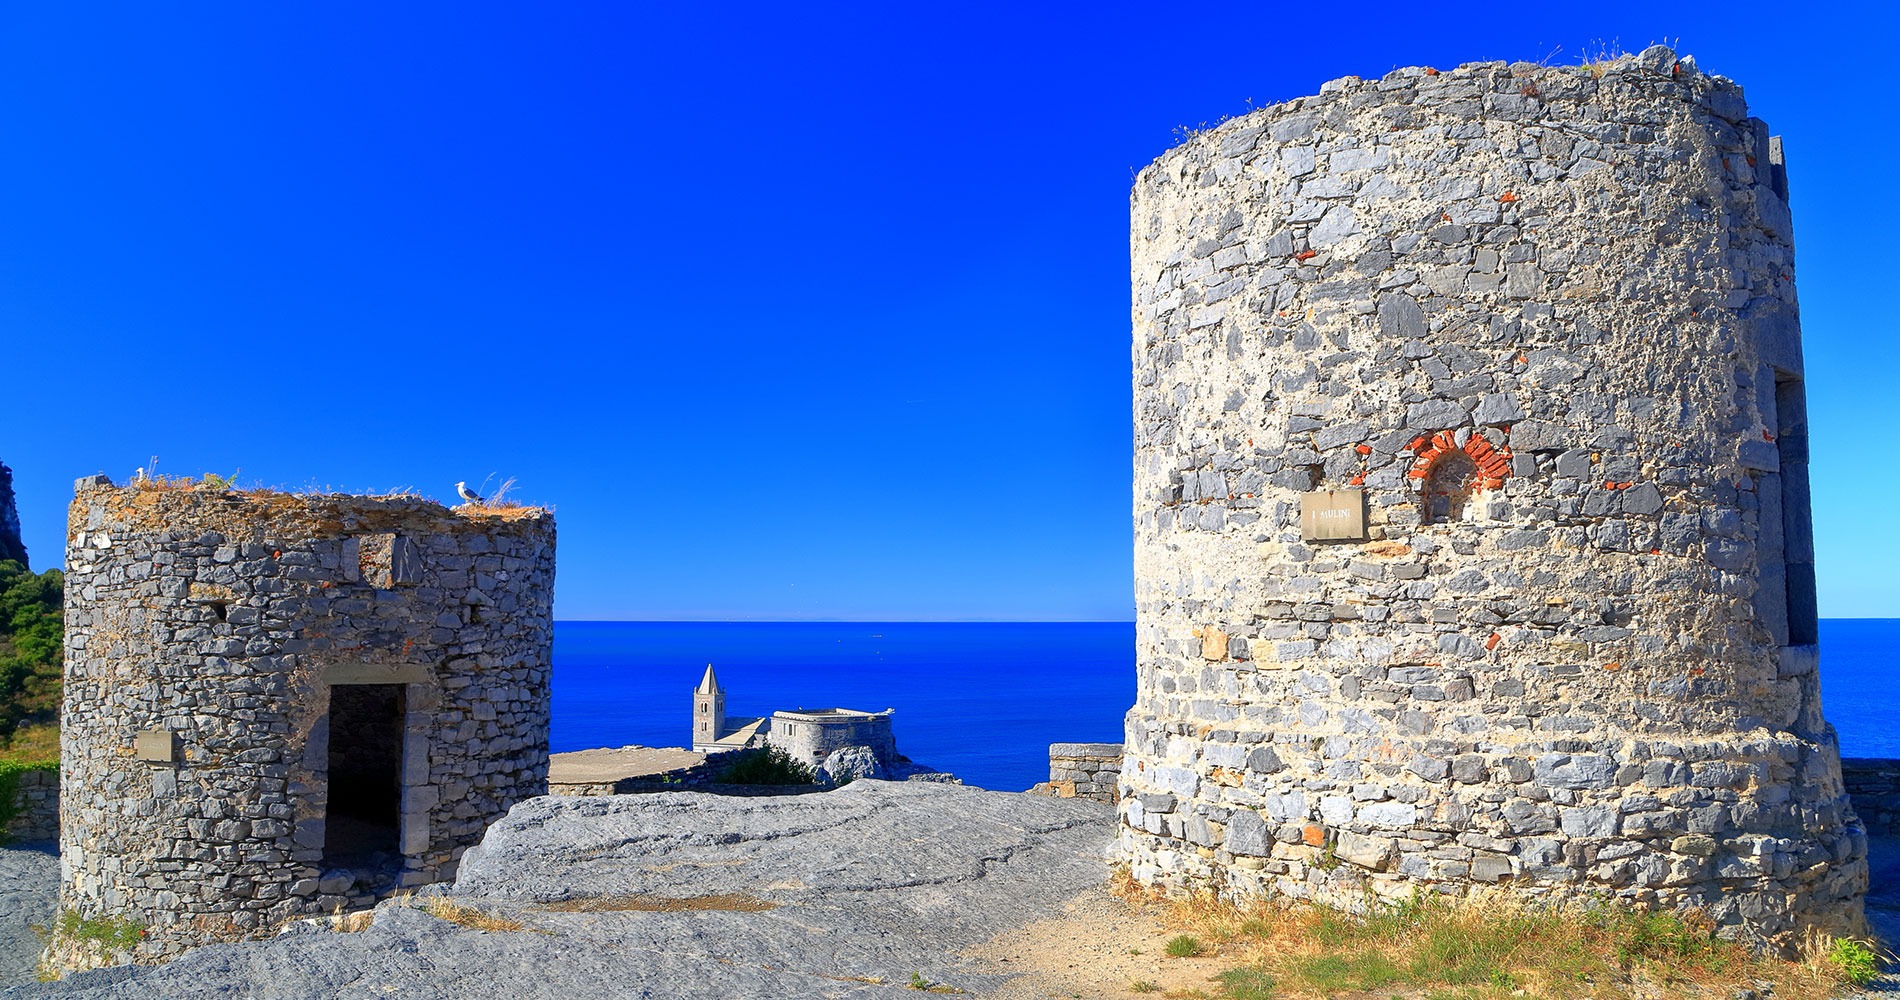 Photos of the remains of the windmills of the Doria Castle in Portovenere